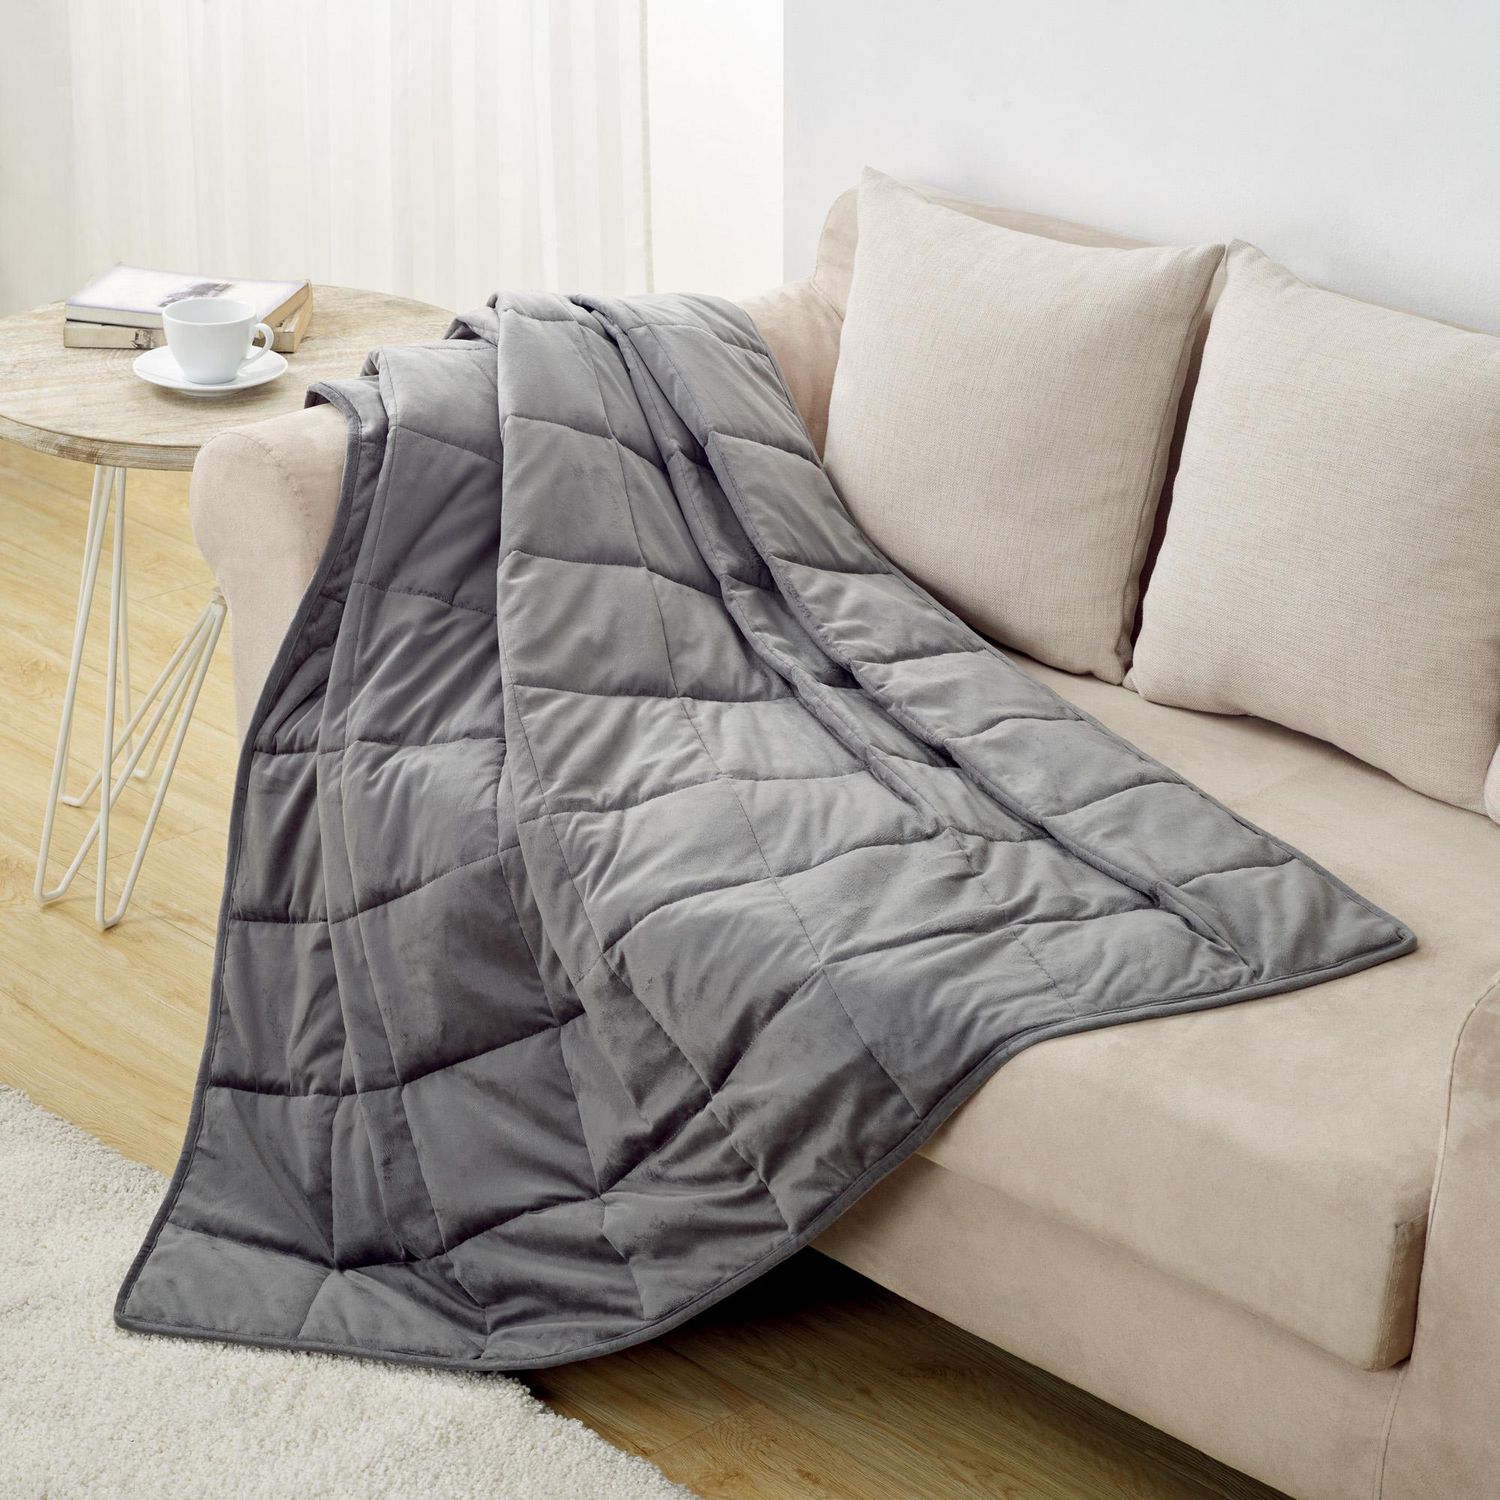 Tranquility Weighted Blanket | Walmart Canada